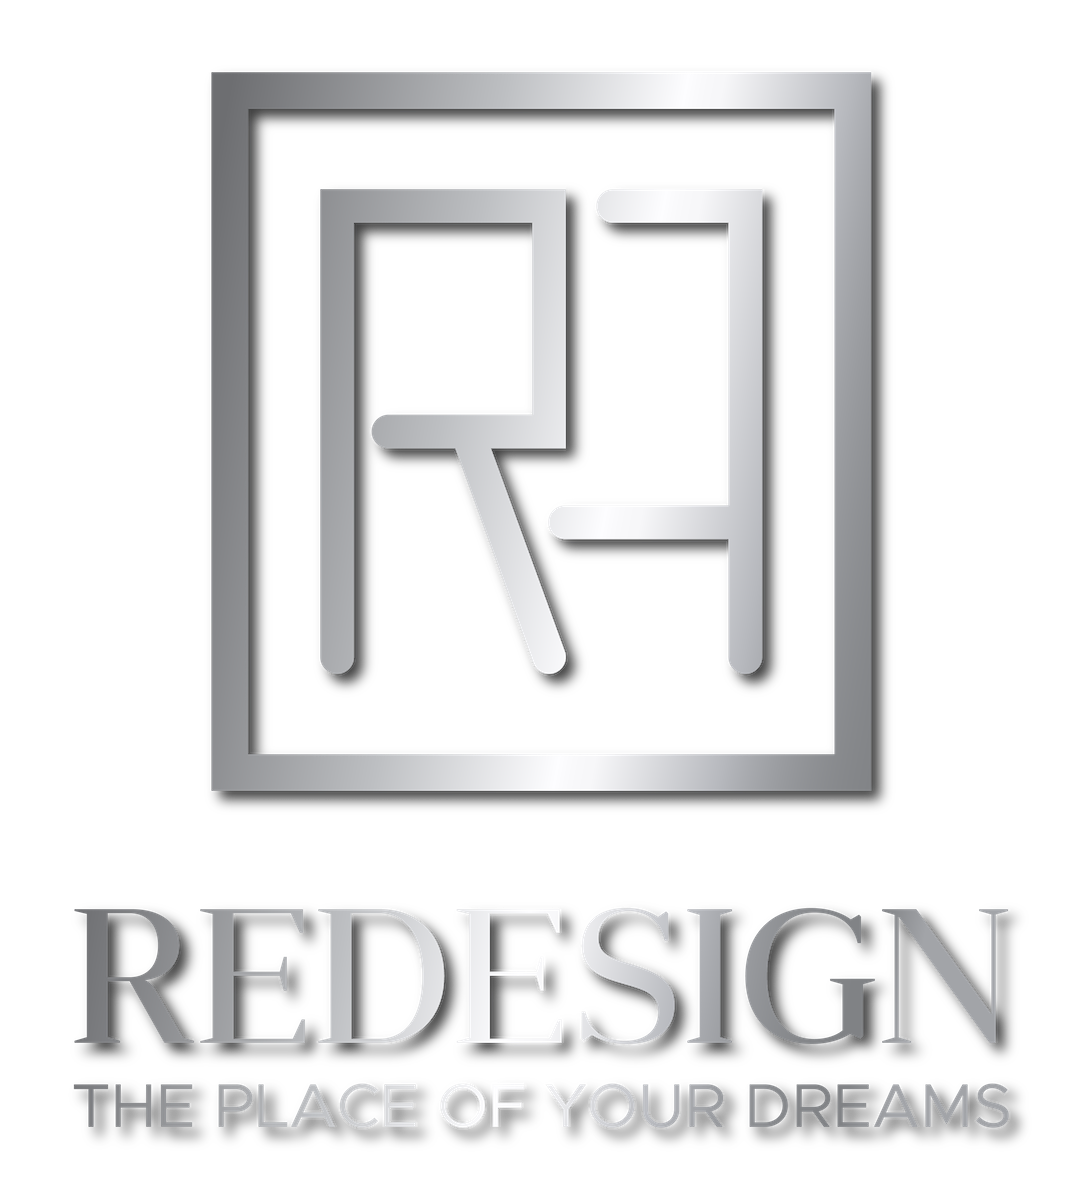 Redesignfitout-redesign the place of your dreams